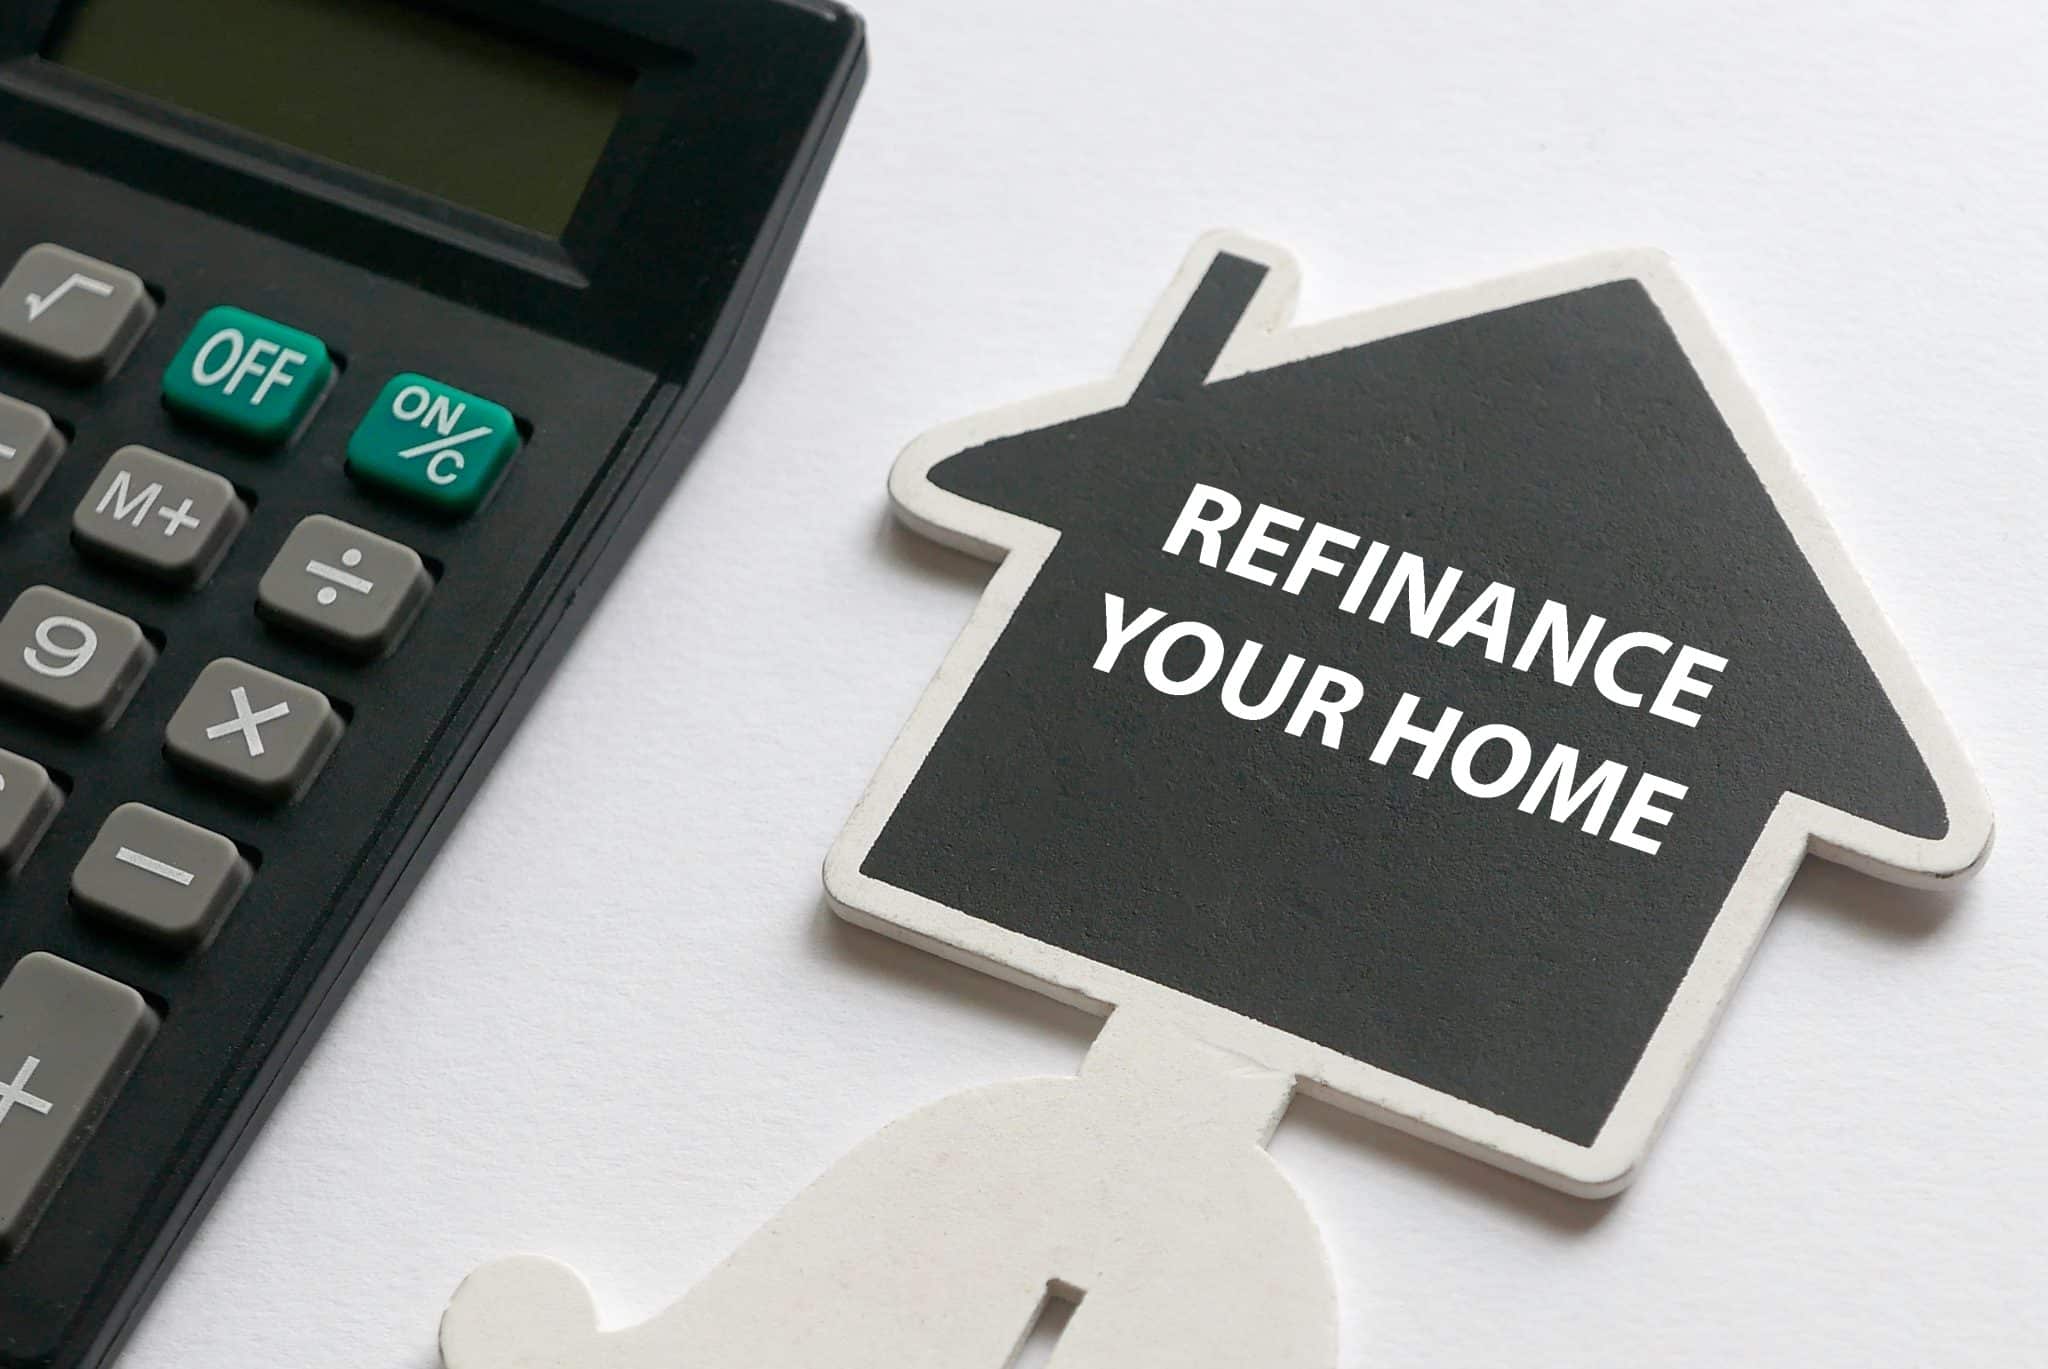 A "refinance your home" sign next to a calculator.